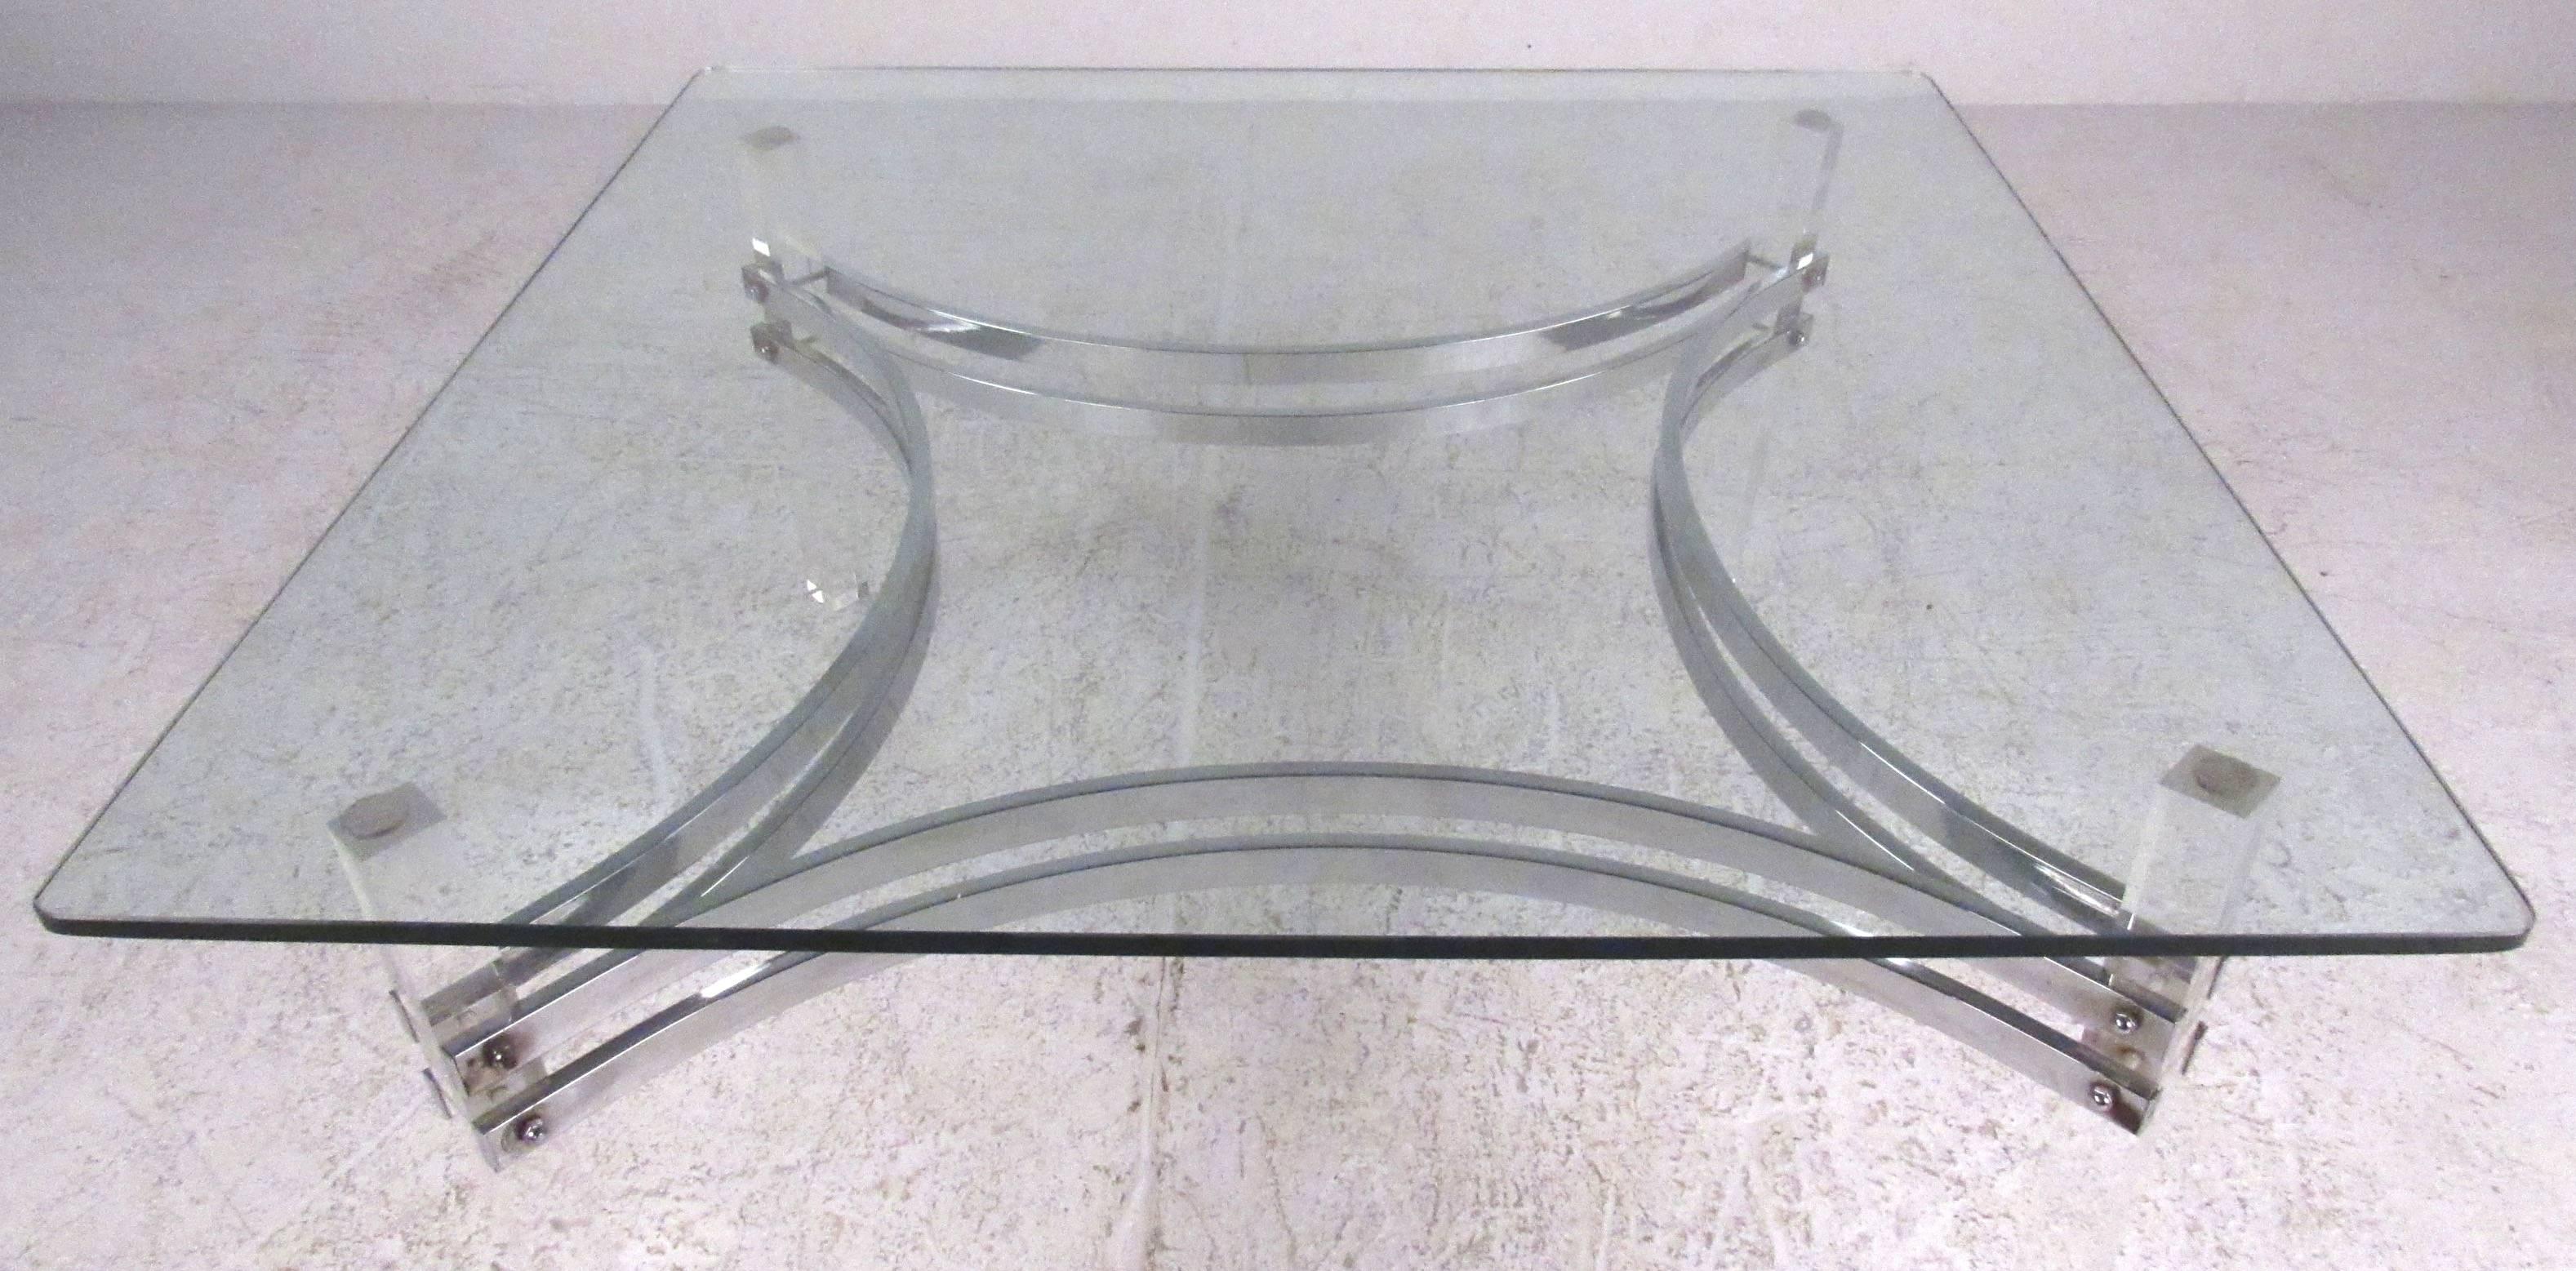 Stylish Mid-Century glass top coffee table with chrome stretchers and solid Lucite legs. A great Mid-Century design that would compliment any modern environment. Please confirm item location (NY or NJ) with dealer.